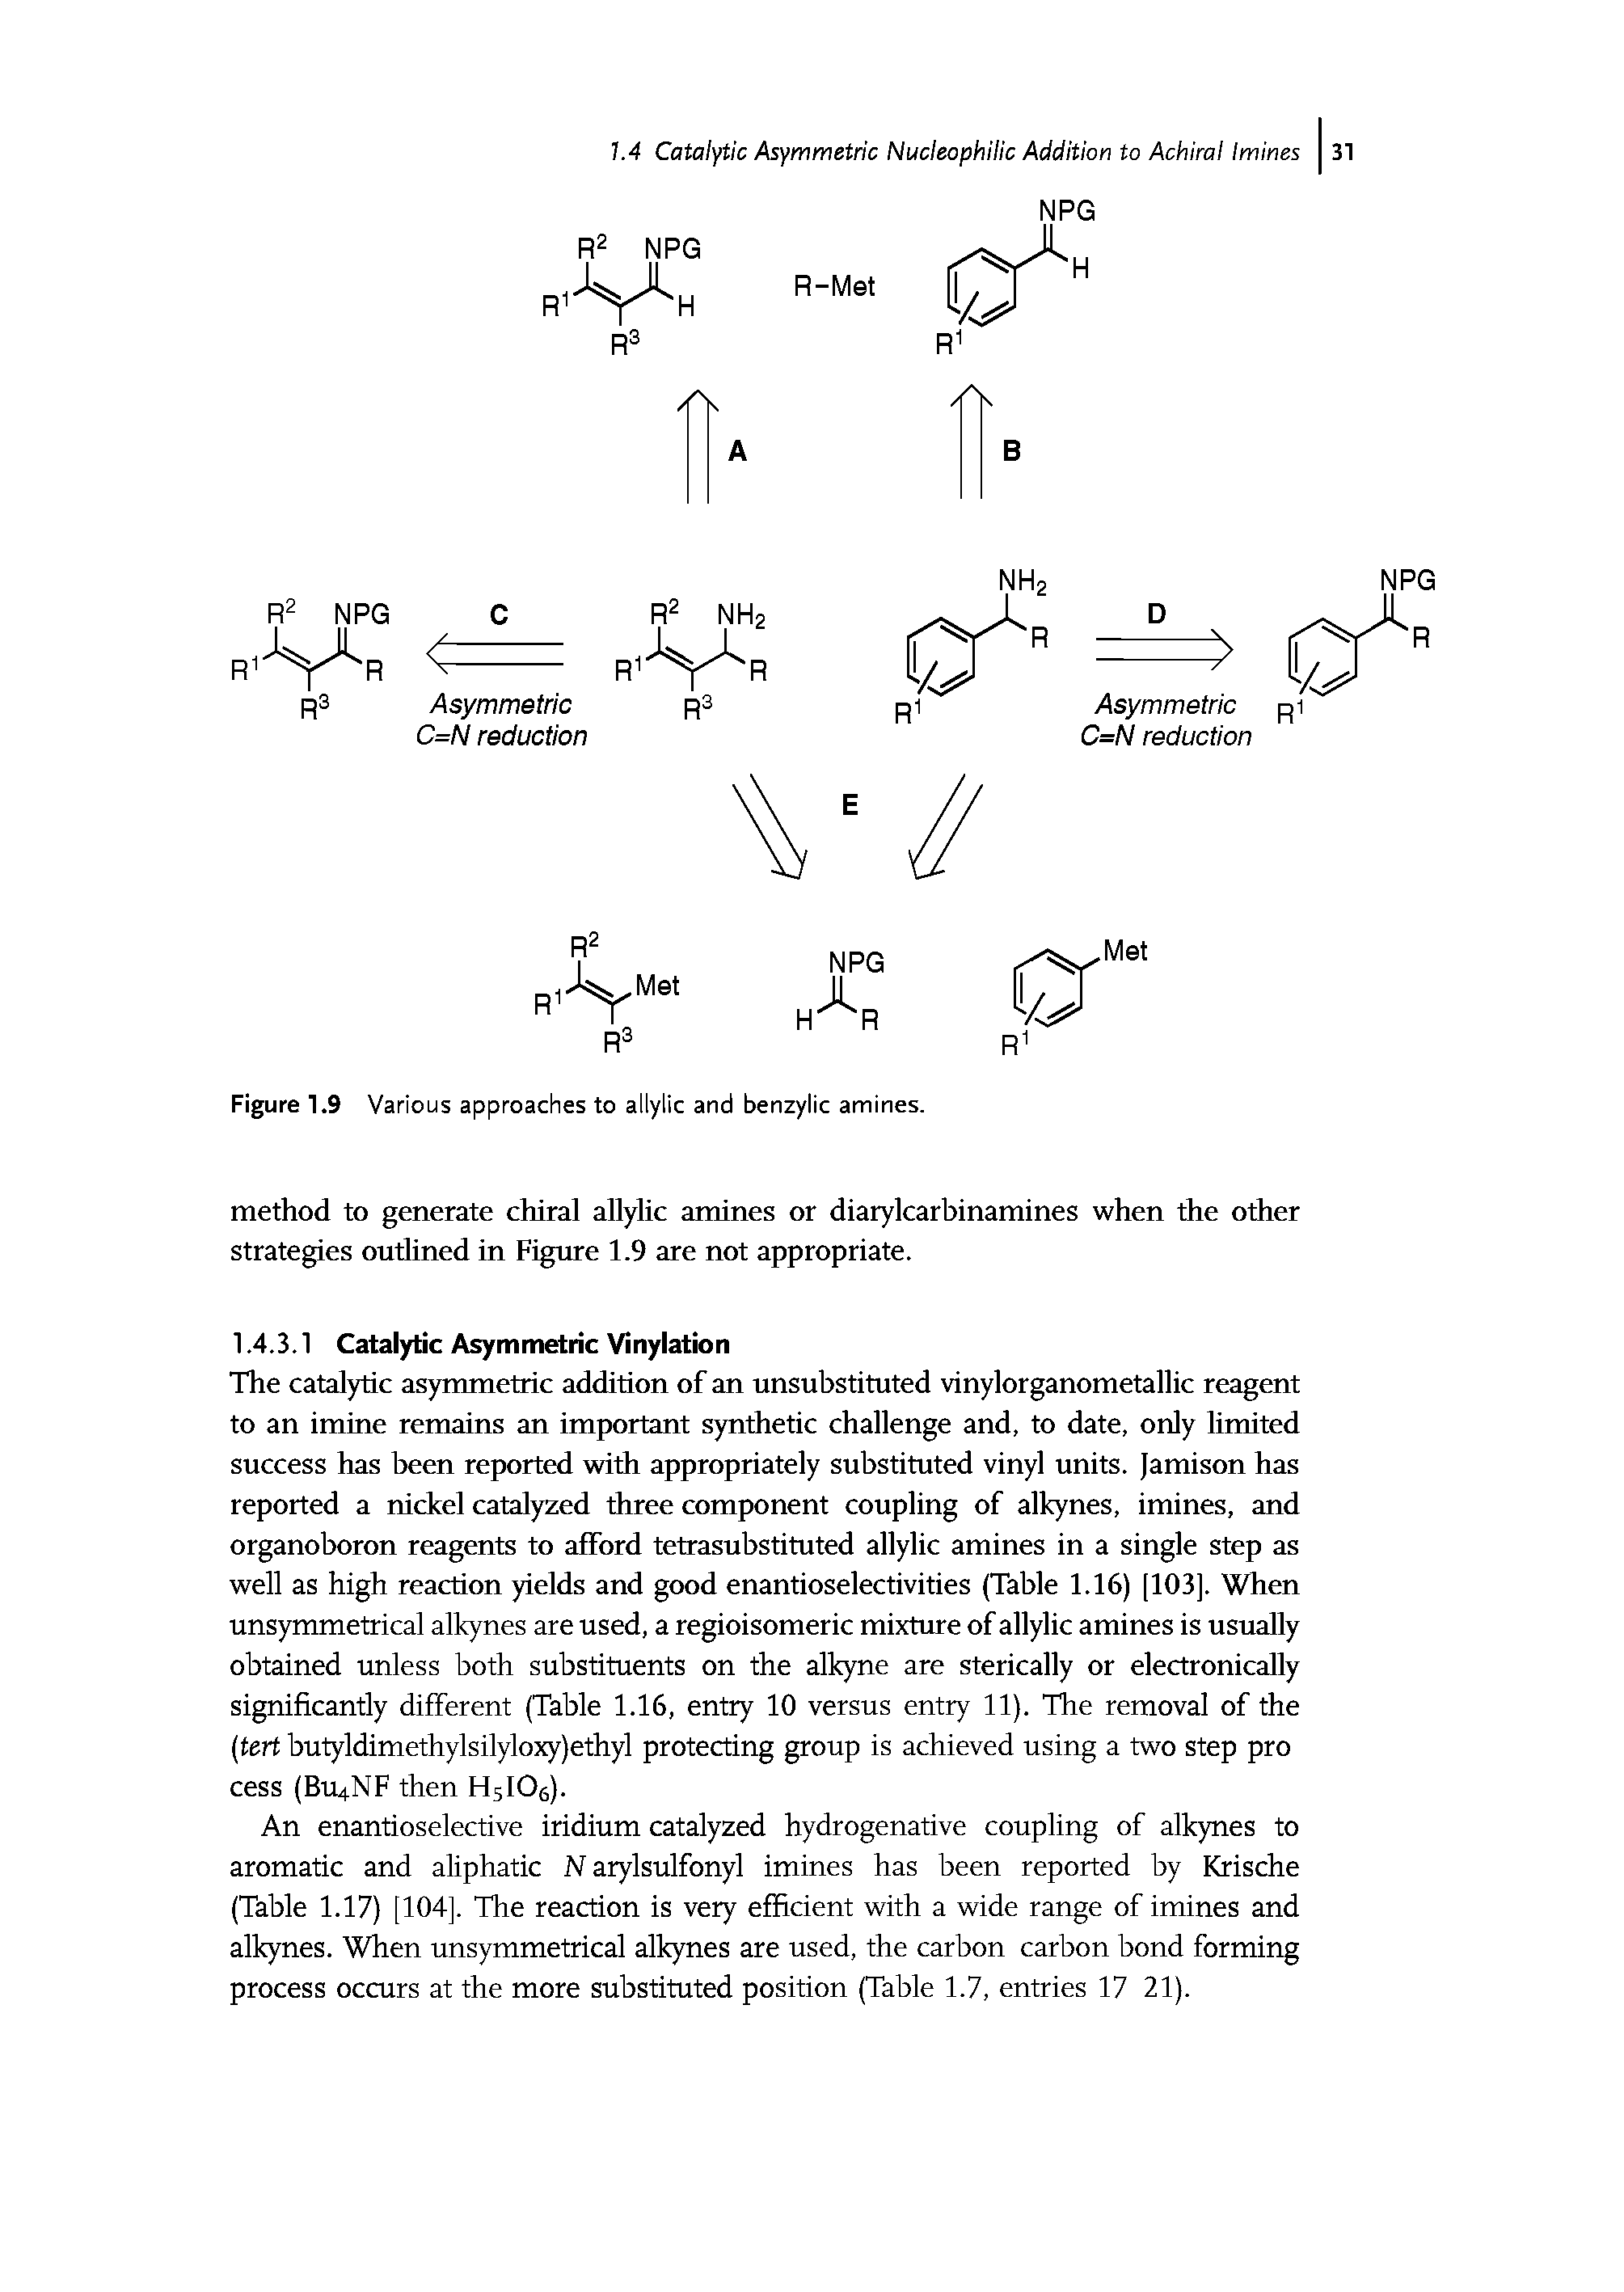 Figure 1.9 Various approaches to allylic and benzylic amines.